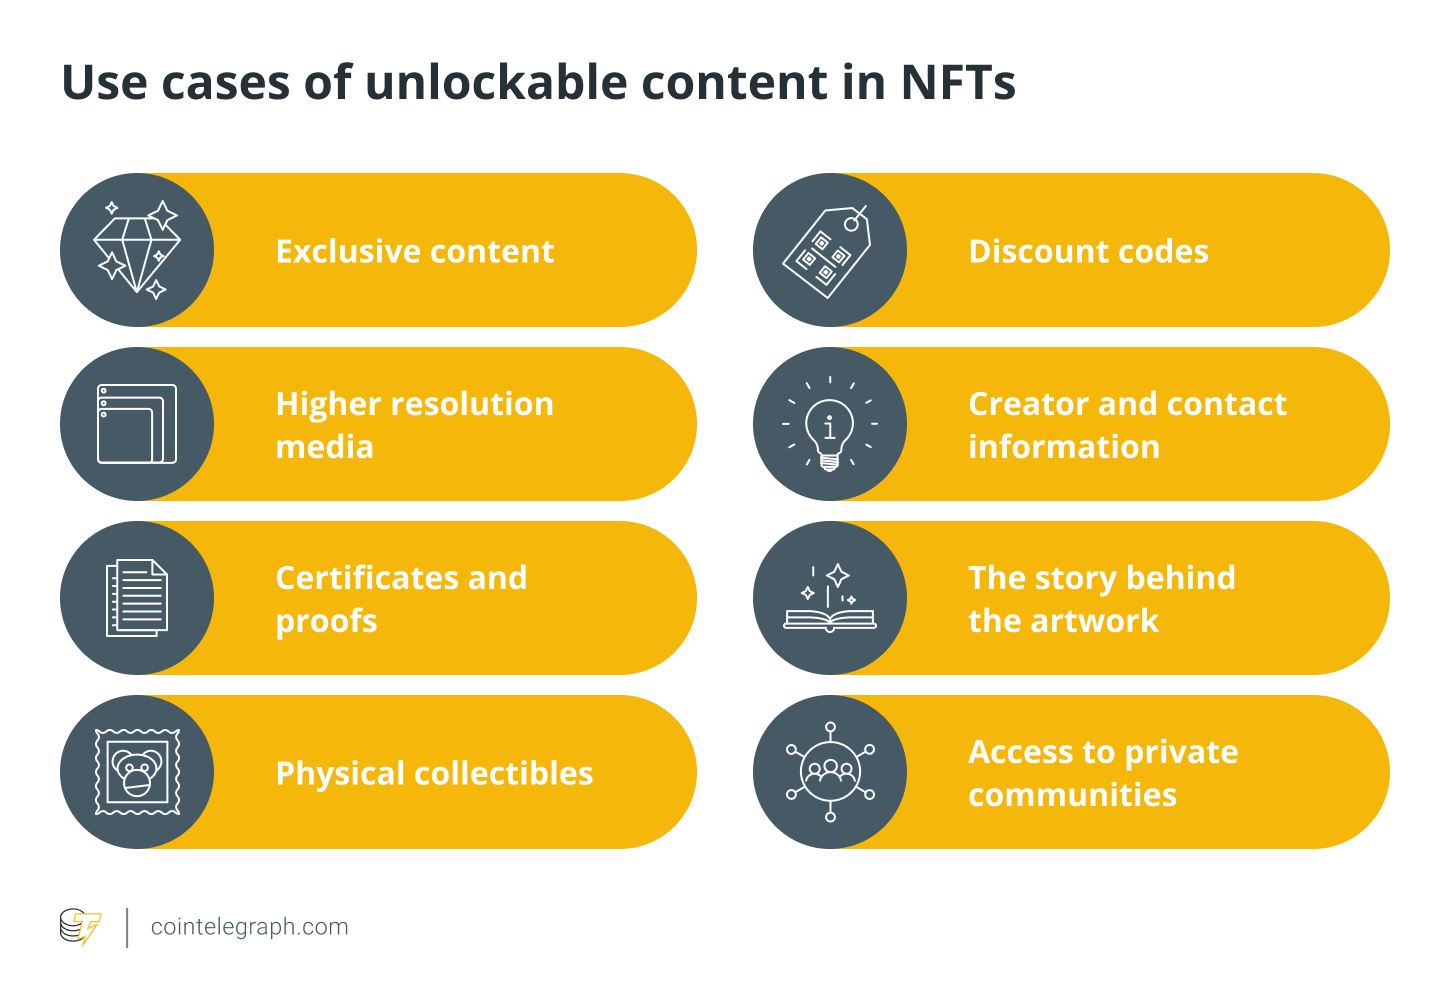 Use cases of unlockable content in NFTs